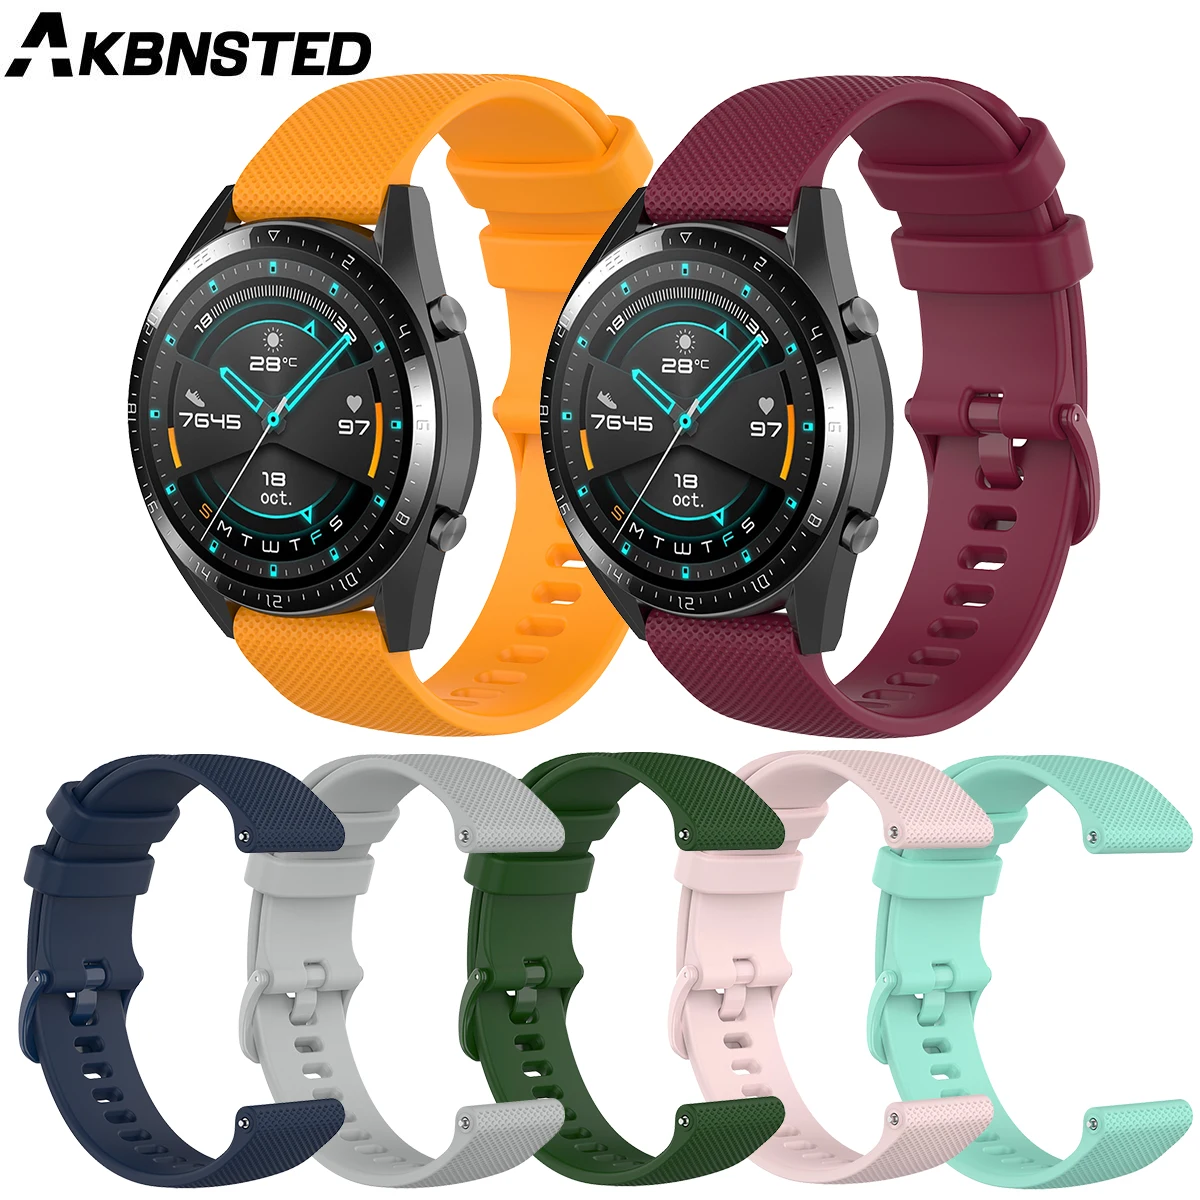 

AKBNSTED 20MM 22MM Silicone Wristband For Huawei GT 2 46MM/Huami Amazfit GTS/GTR/Garmin Vivoactive 4/3/Venu Sport Watch Strap